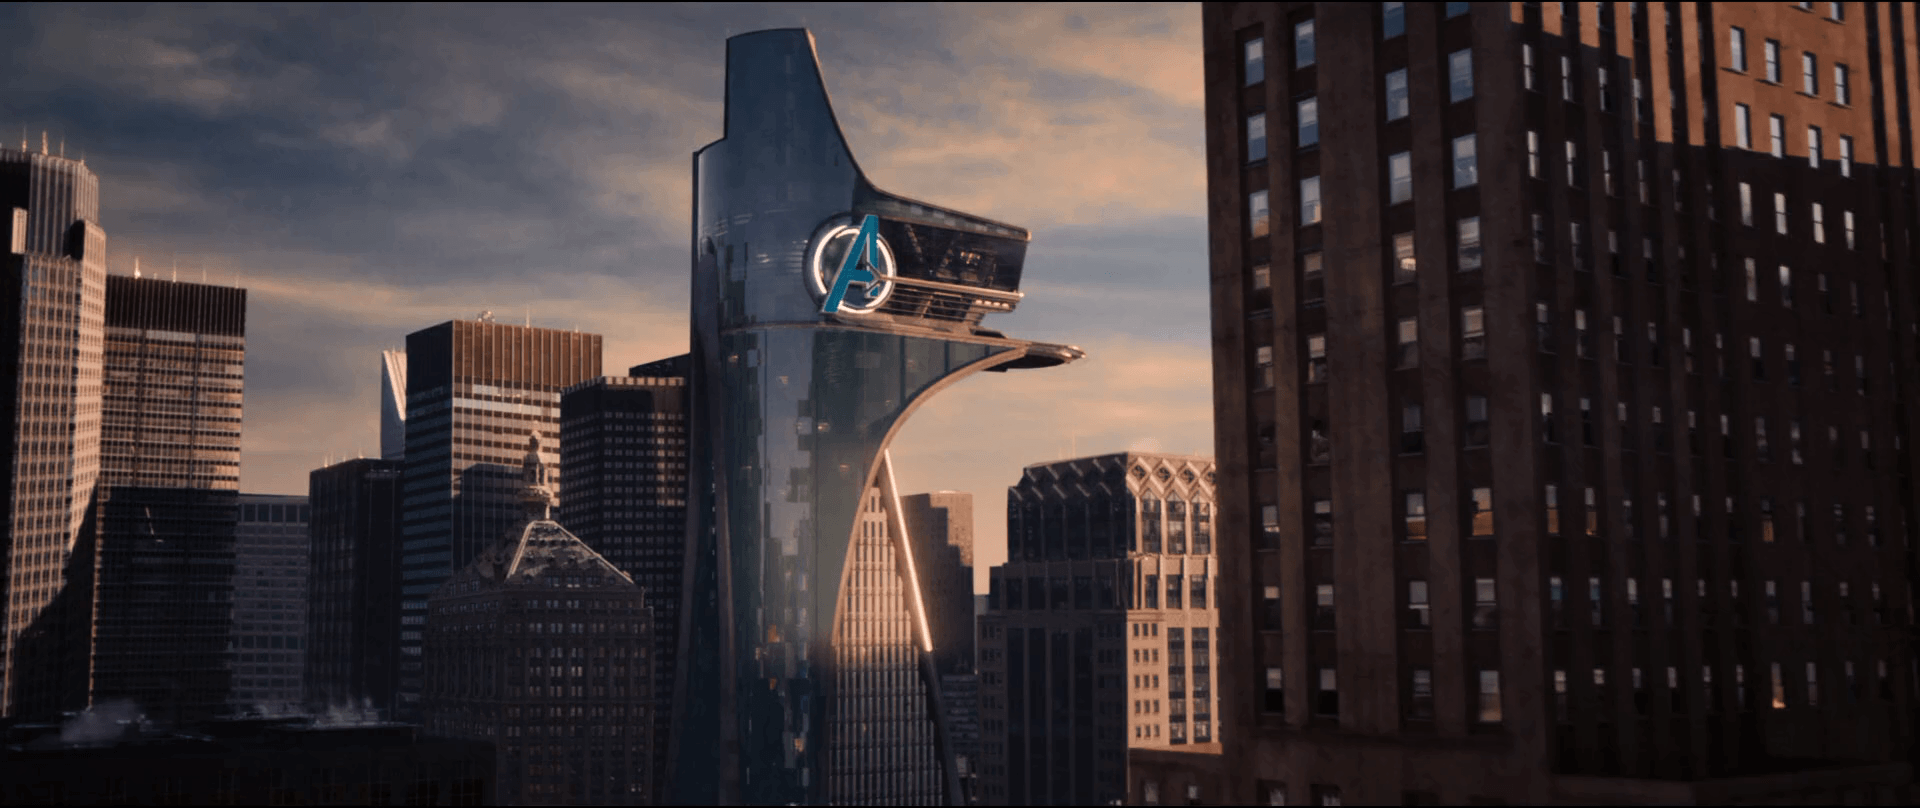 Avengers Tower. Marvel Cinematic Universe